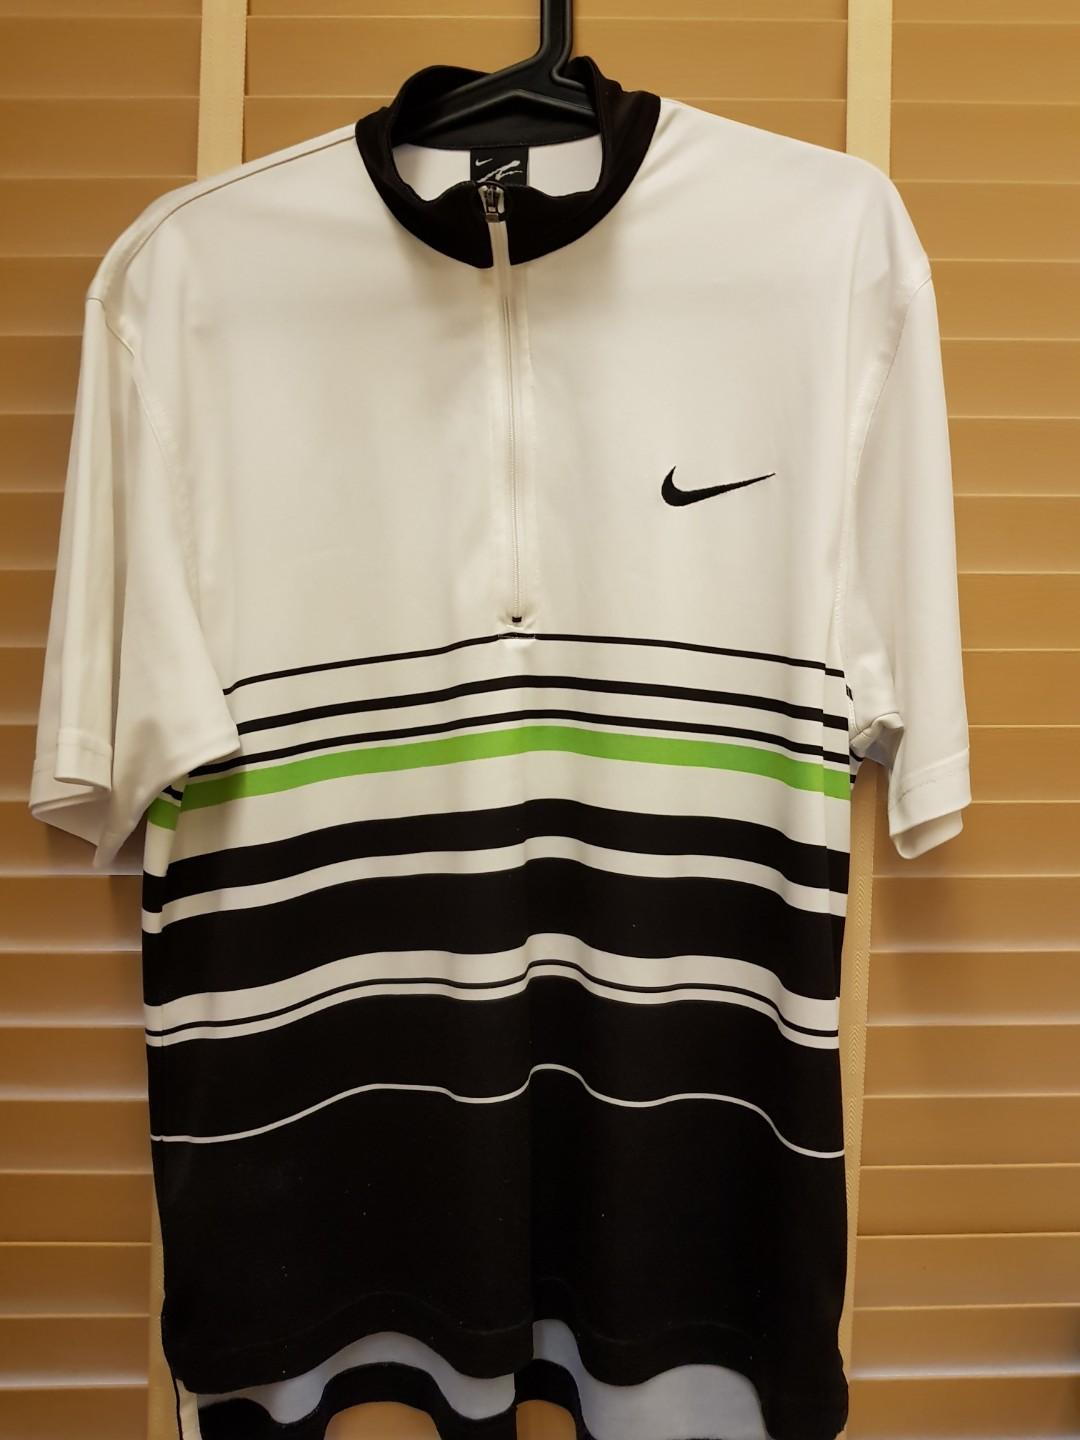 Nike Andre Agassi shirt ( 2 piece price 